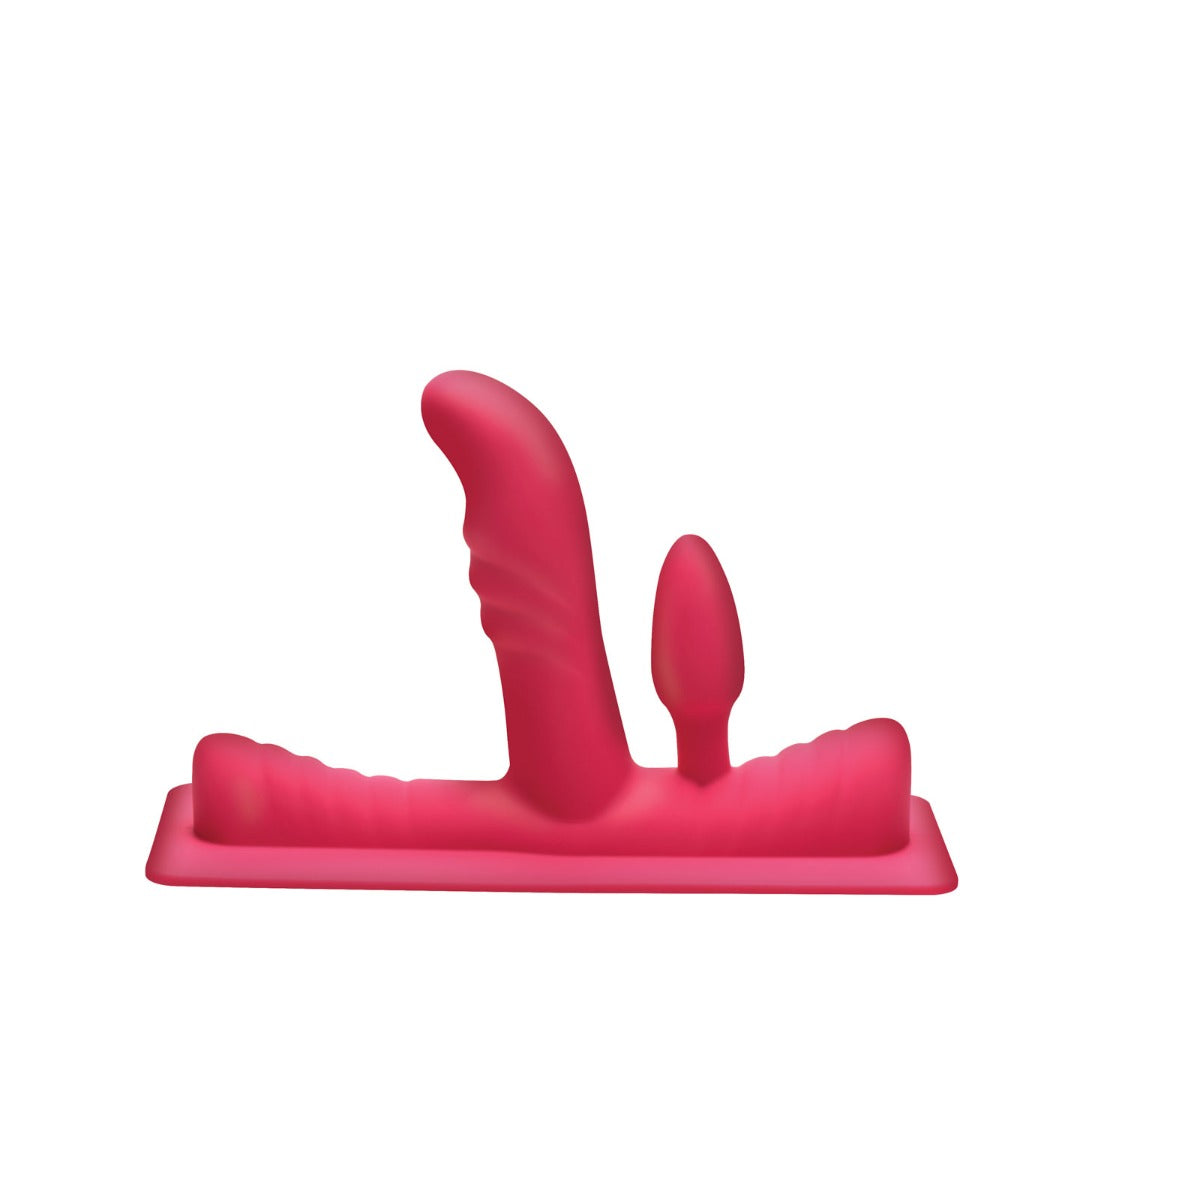 LOVEBOTZ Saddle Ultimate Sex Machine With 4 Silicone Attachments